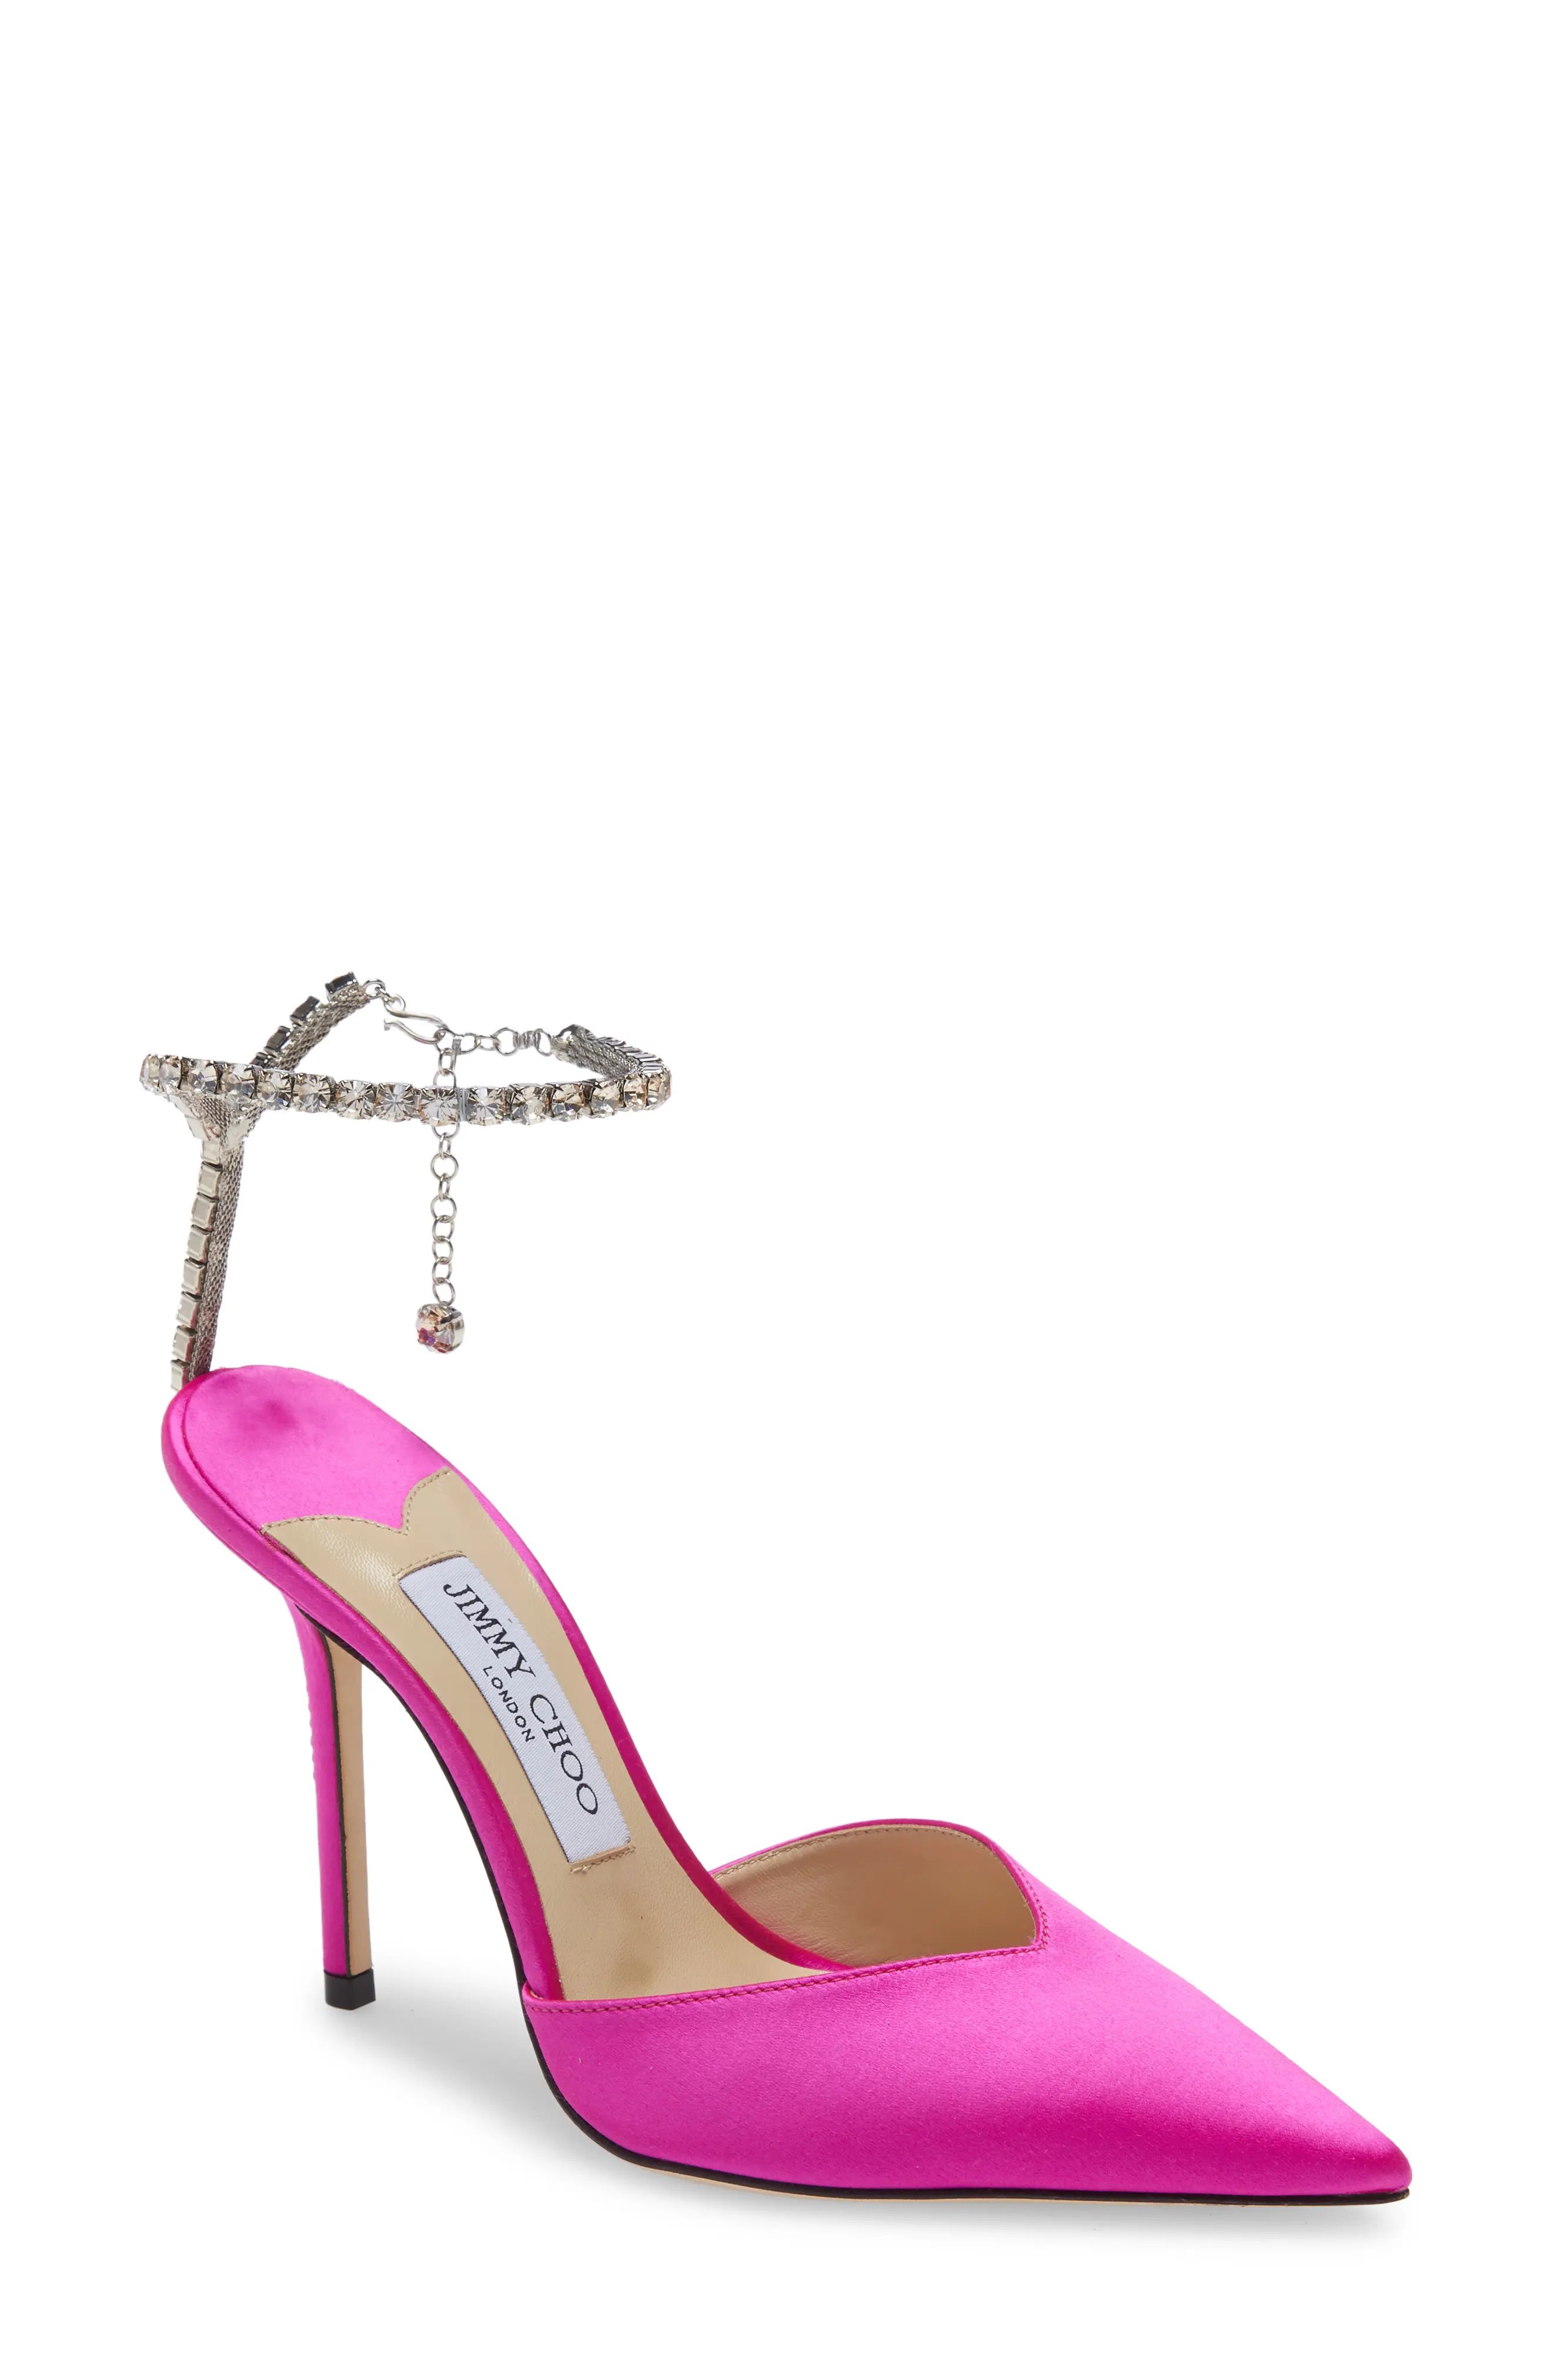 Jimmy Choo Saeda Crystal Ankle Strap Pointed Toe Pump in Fuchsia at Nordstrom, Size 9.5Us | Nordstrom